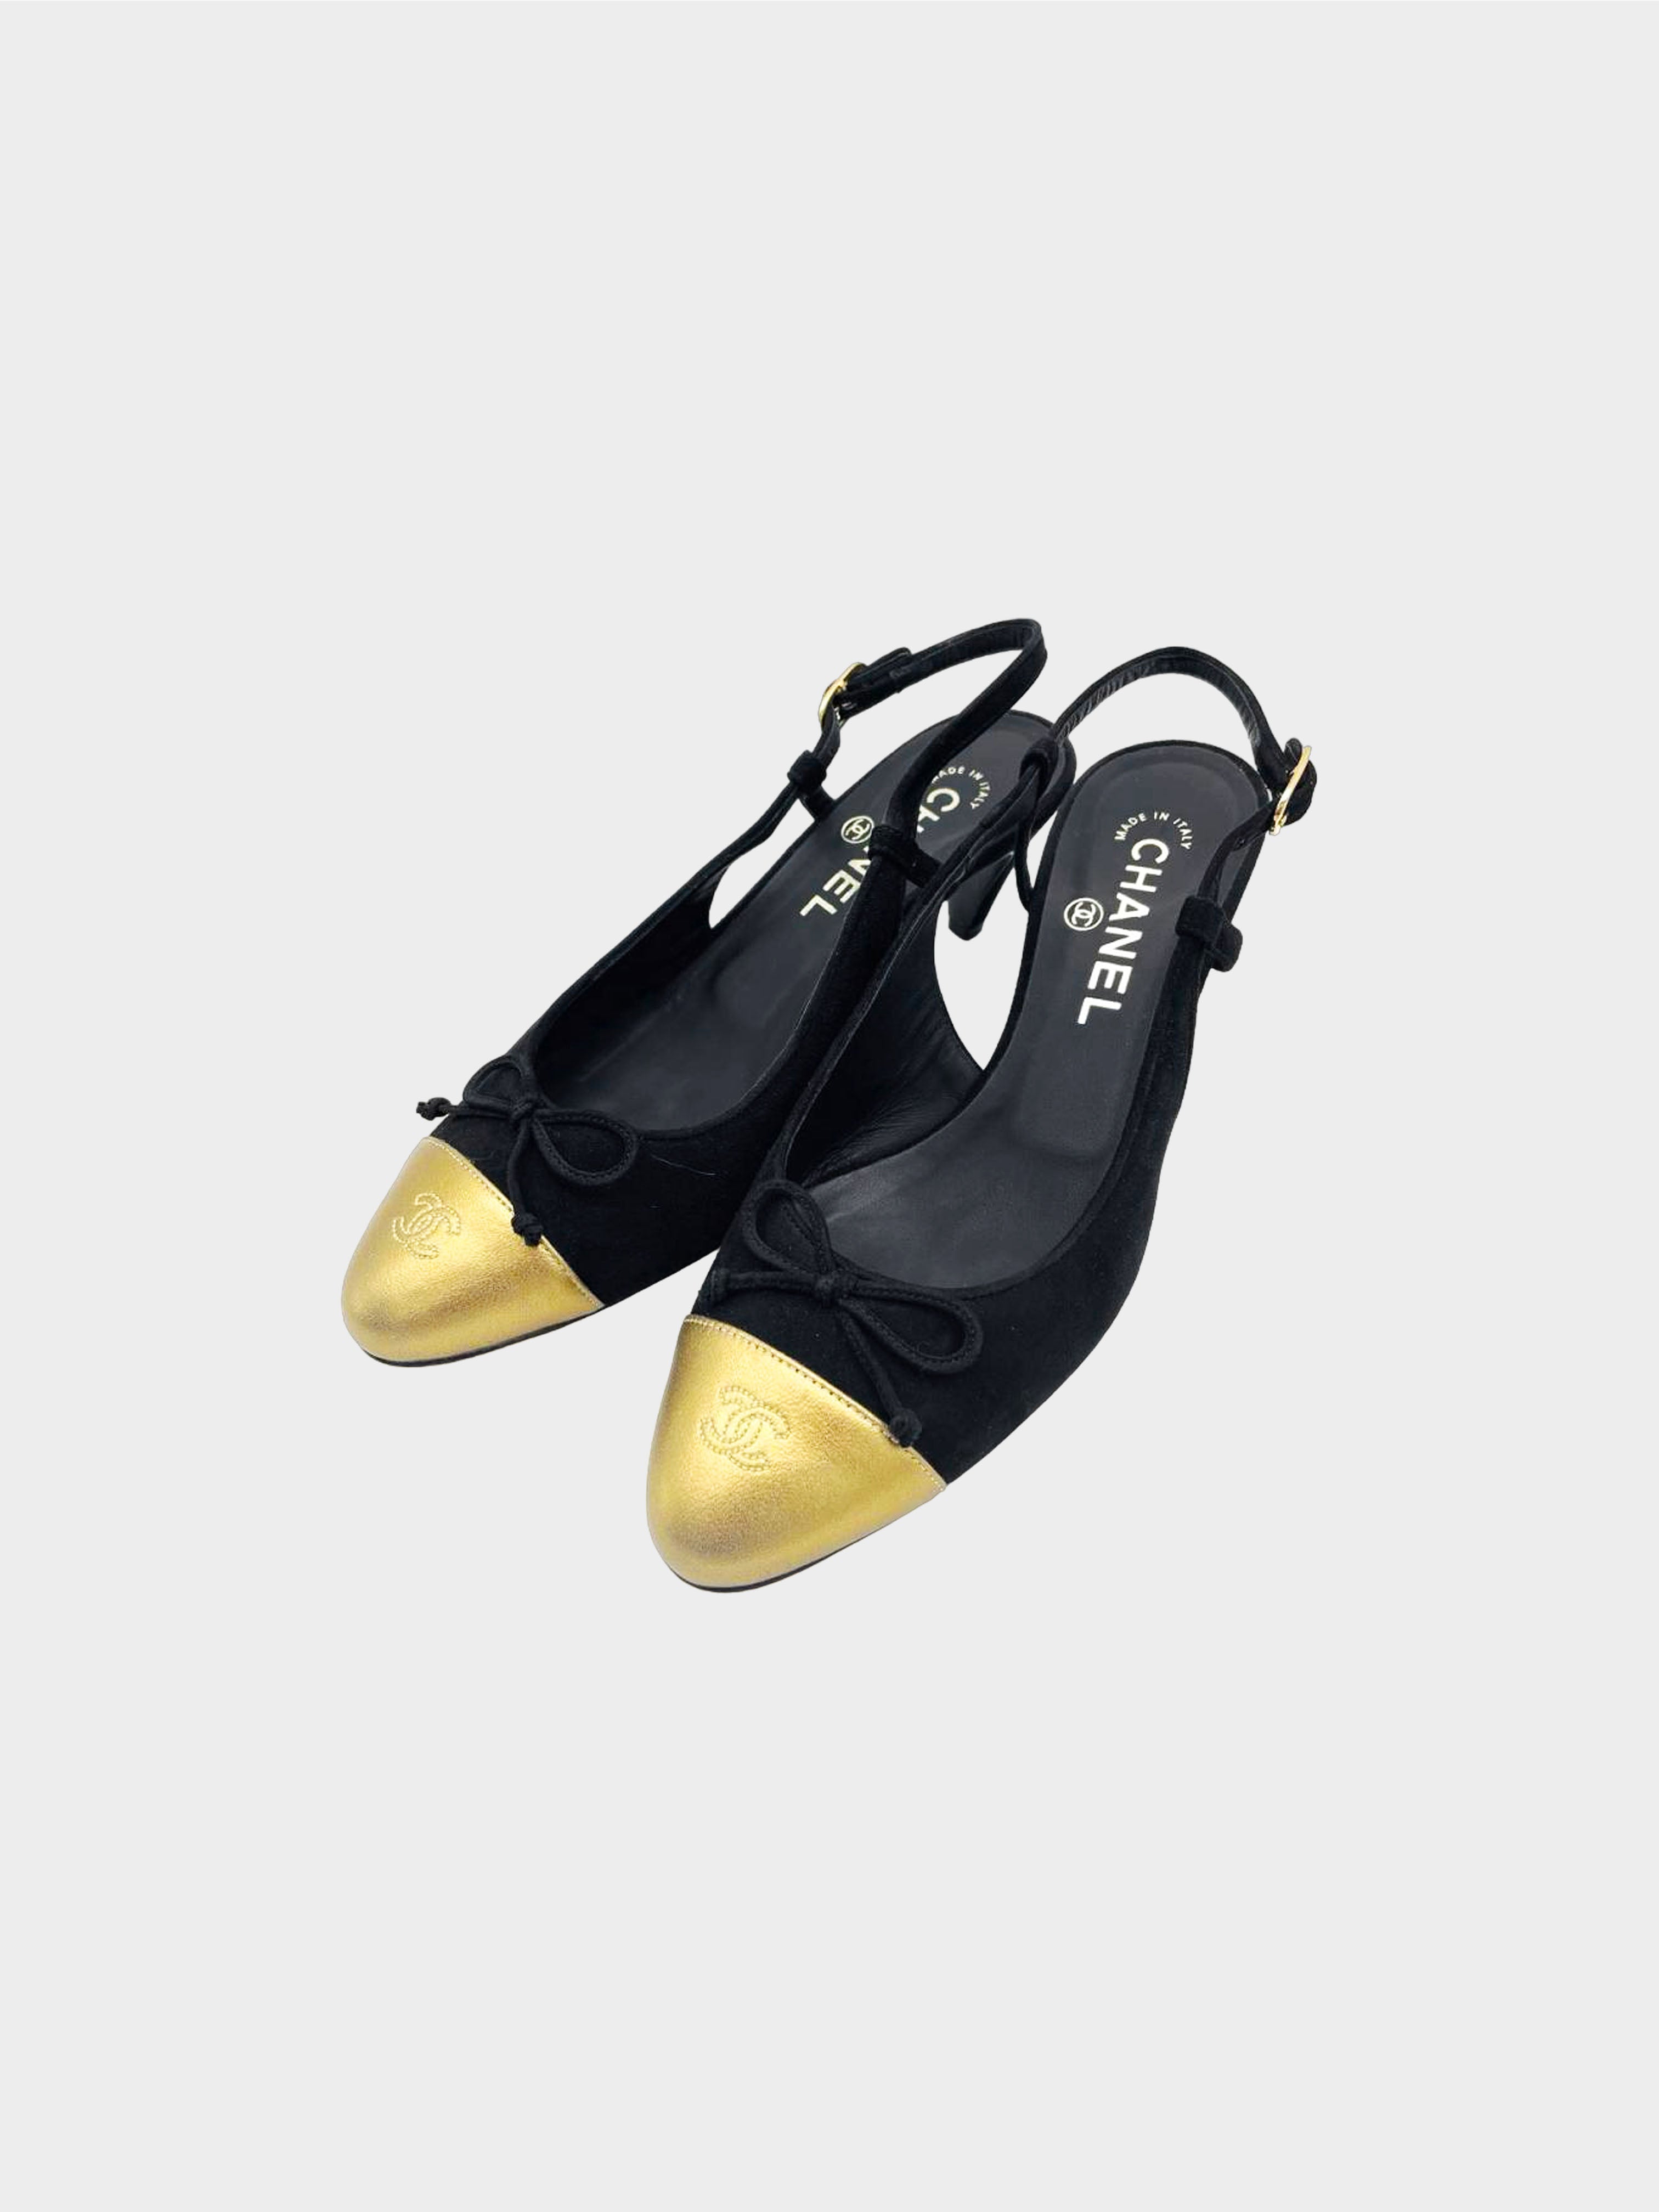 Chanel 2000s Black and Gold Two-toned Slingback Heels